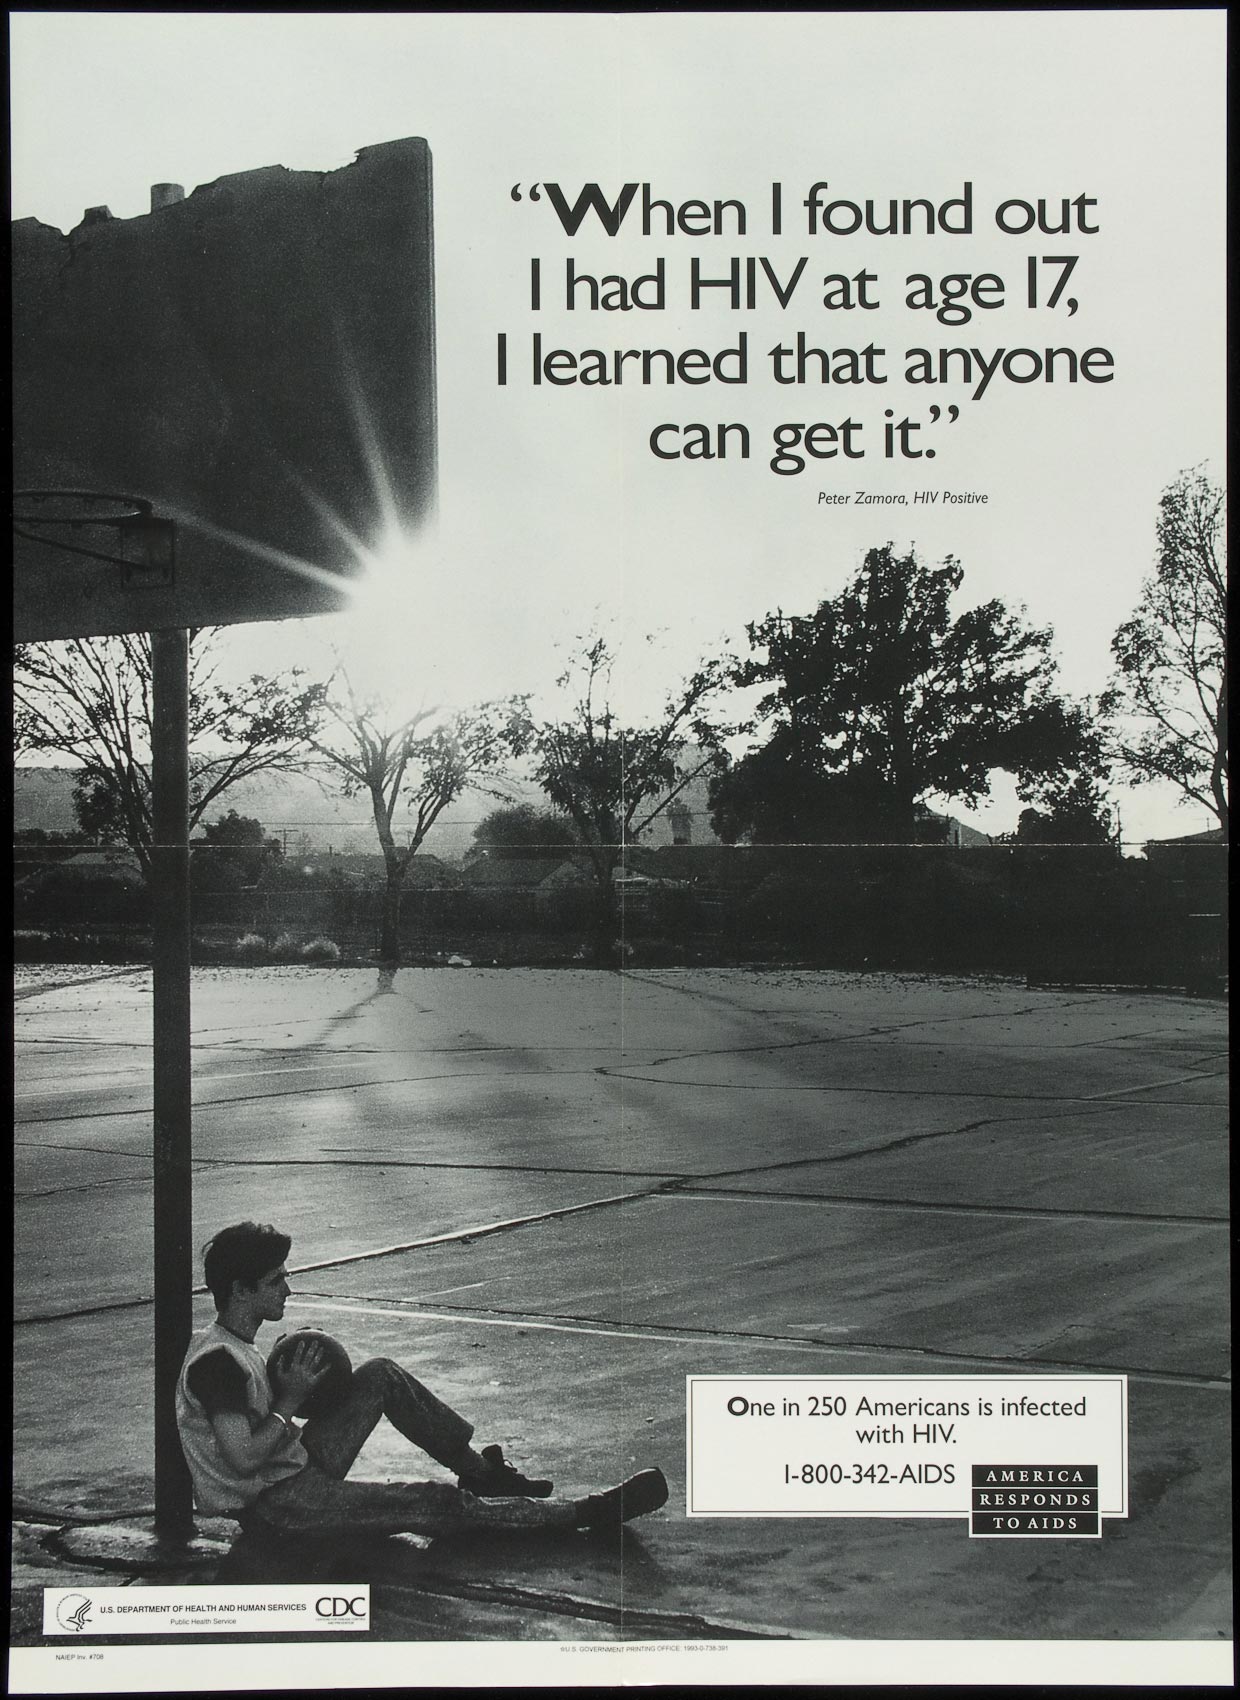 When I found out I had HIV at age 17, I learned that ...